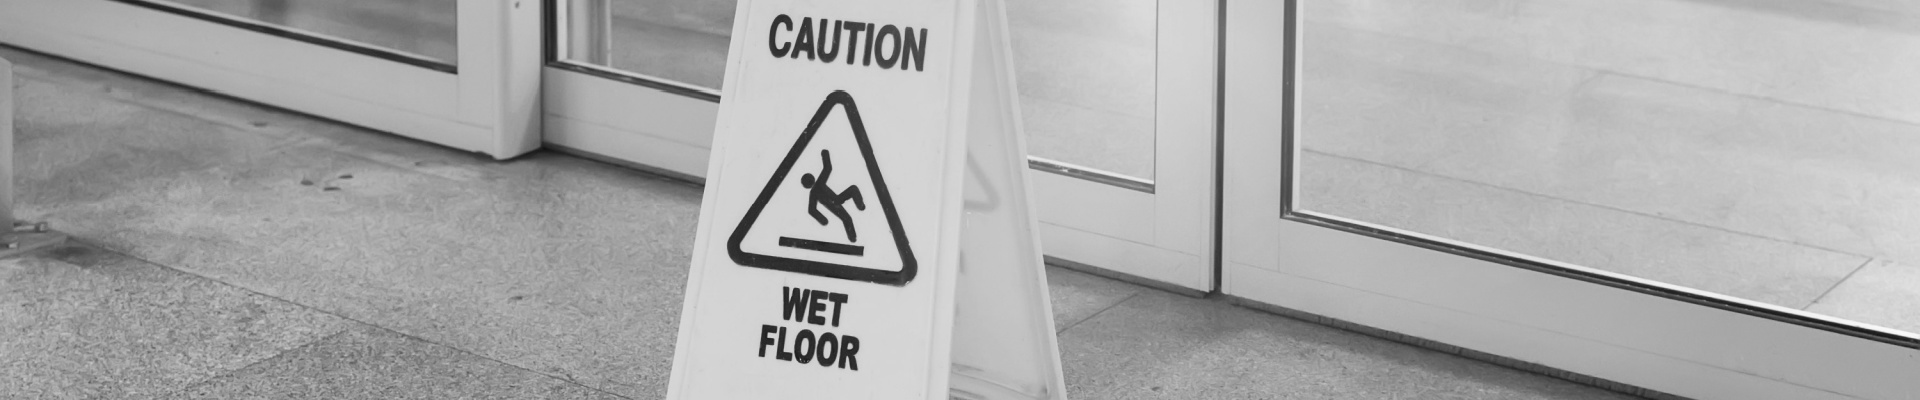 Oroville Slip And Fall Lawyer